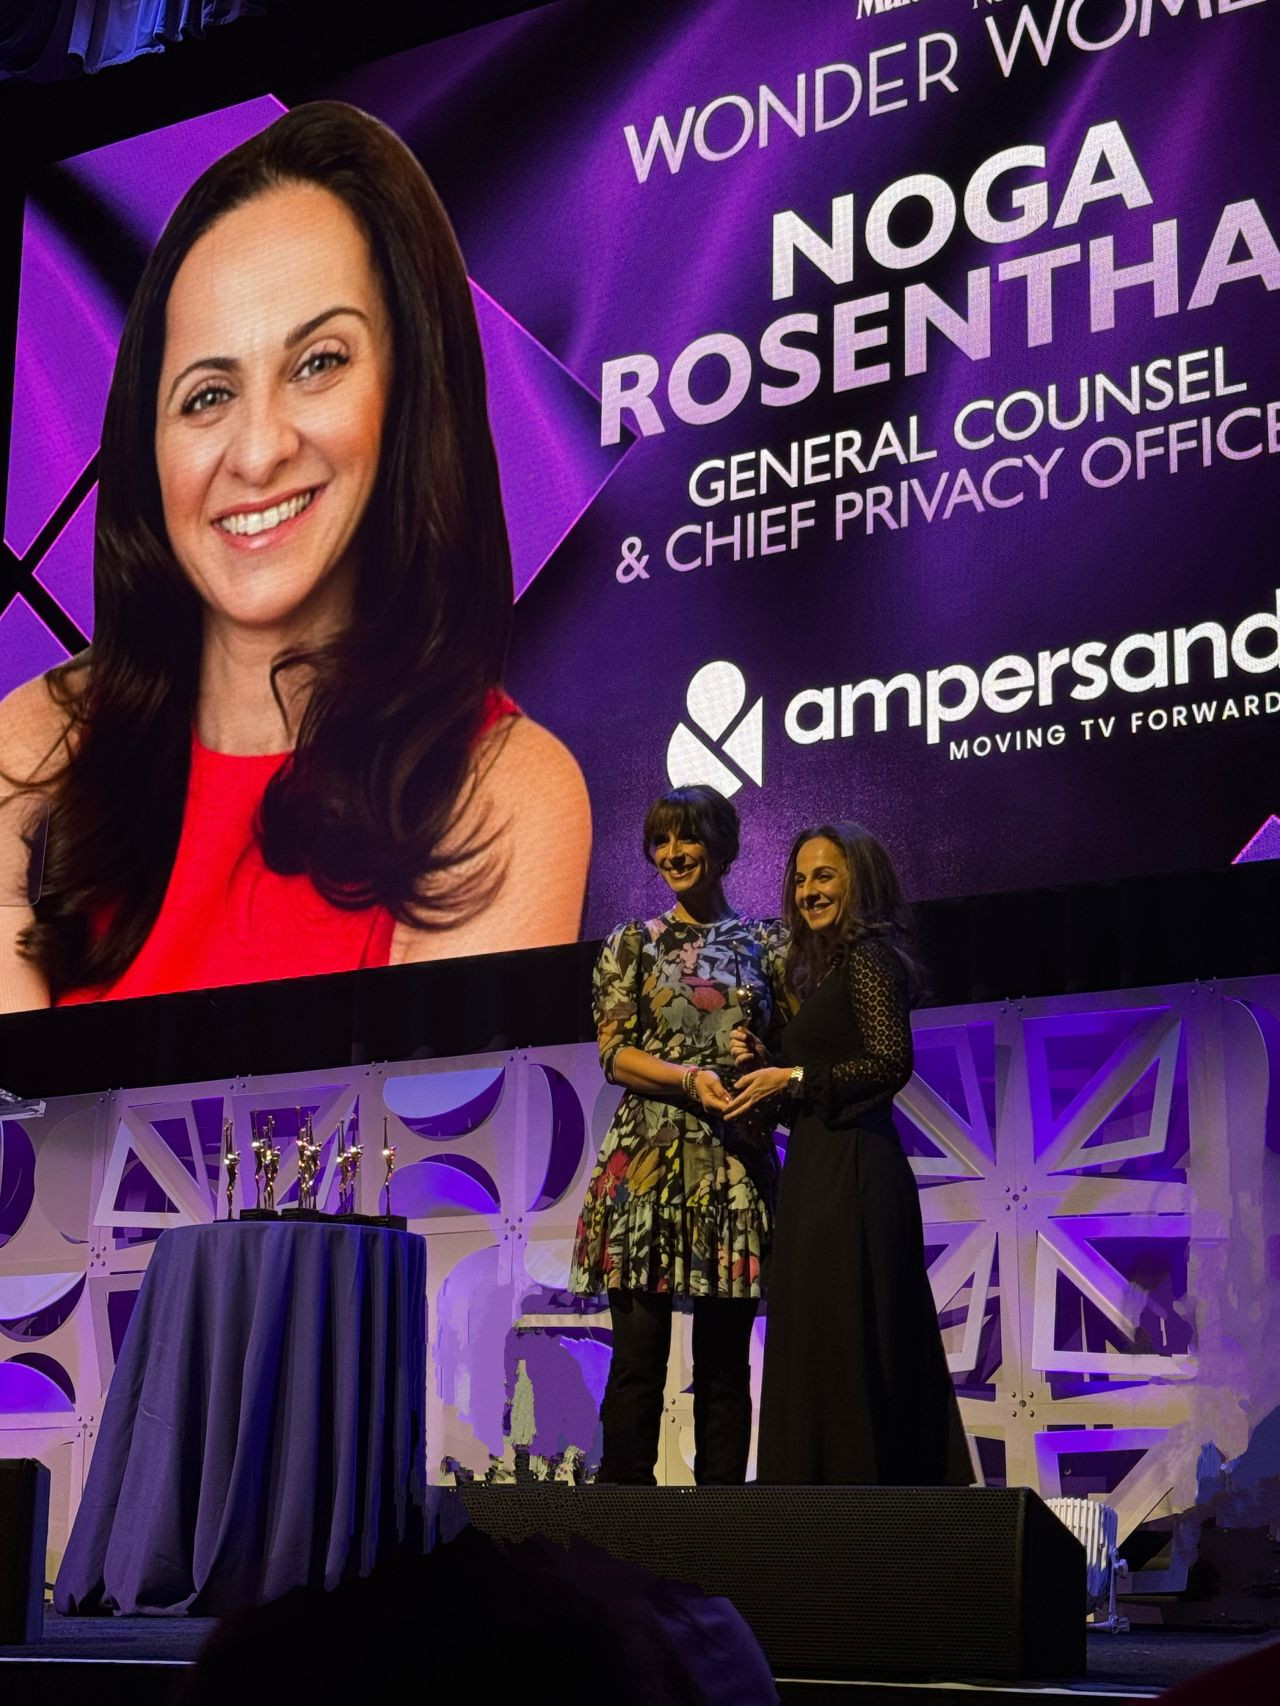 Ampersand's General Counsel & Chief Privacy Officer was honored at the MCN Wonder Women awards.